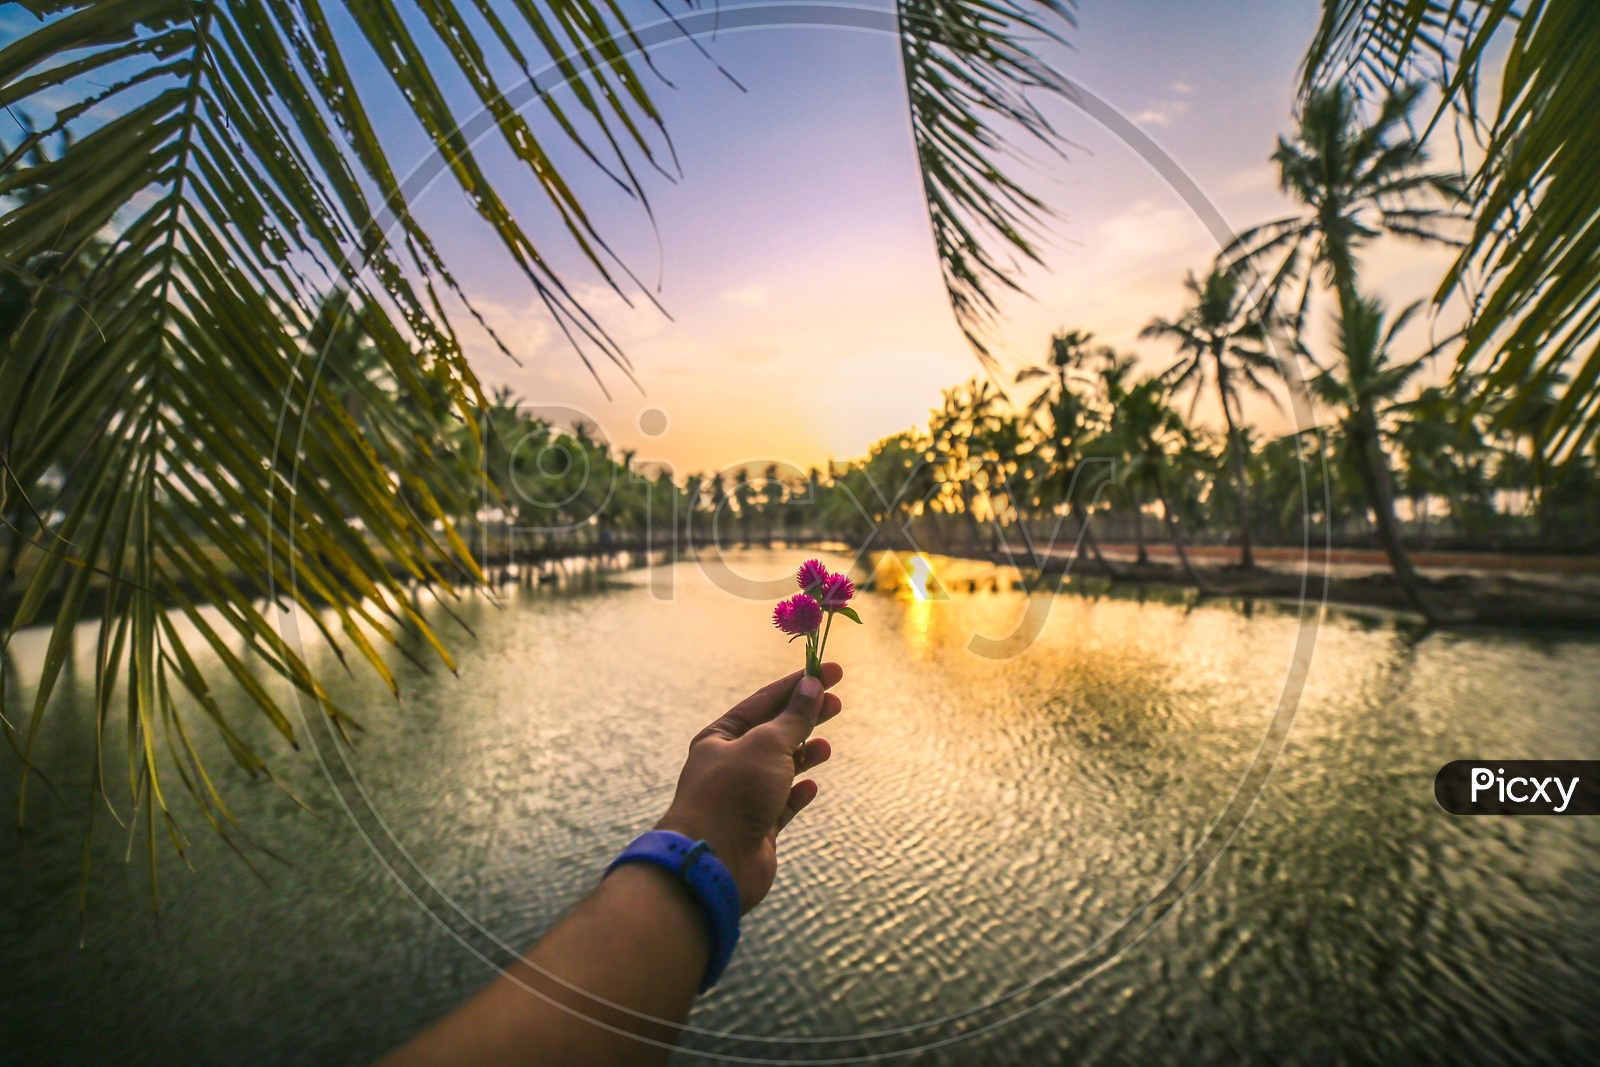 A Beautiful View Of  a Pond With Coconut Trees  on The Both Sides